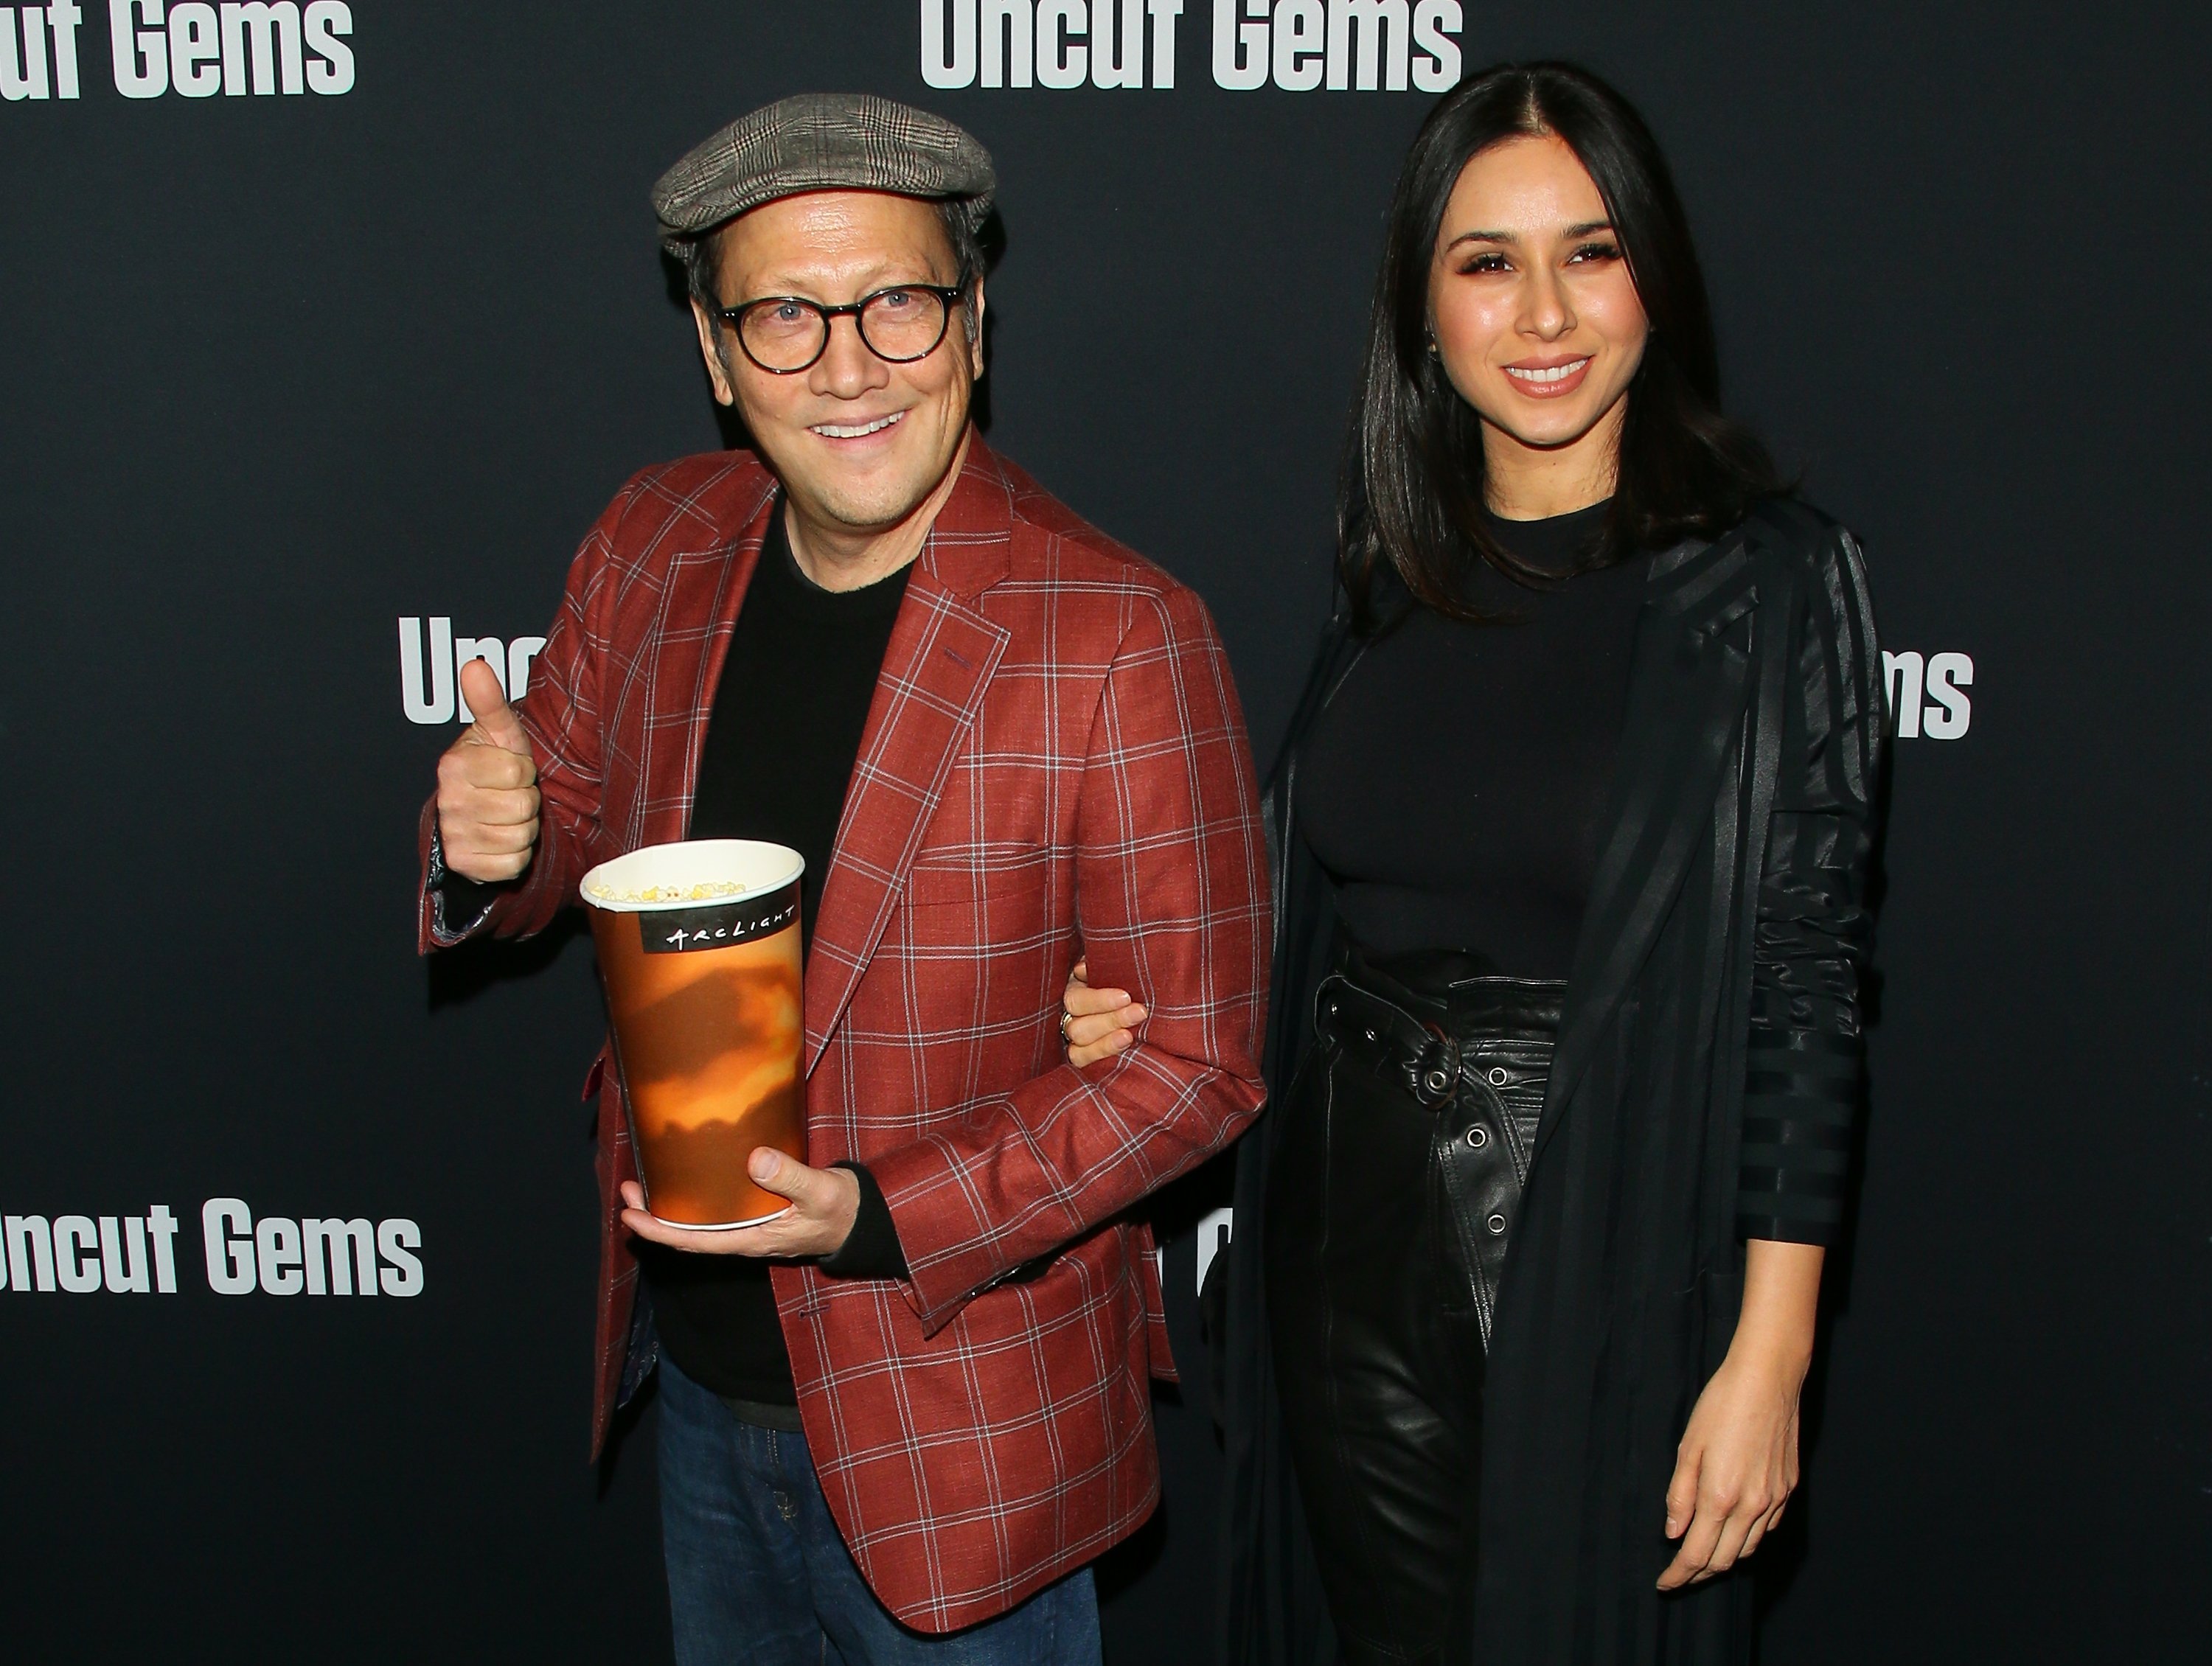 Rob Schneider and Patricia Azarcoya Schneider attending the premiere of  "Uncut Gems" at The Dome at Arclight Hollywood  on December 2019. I Image: Getty Images.